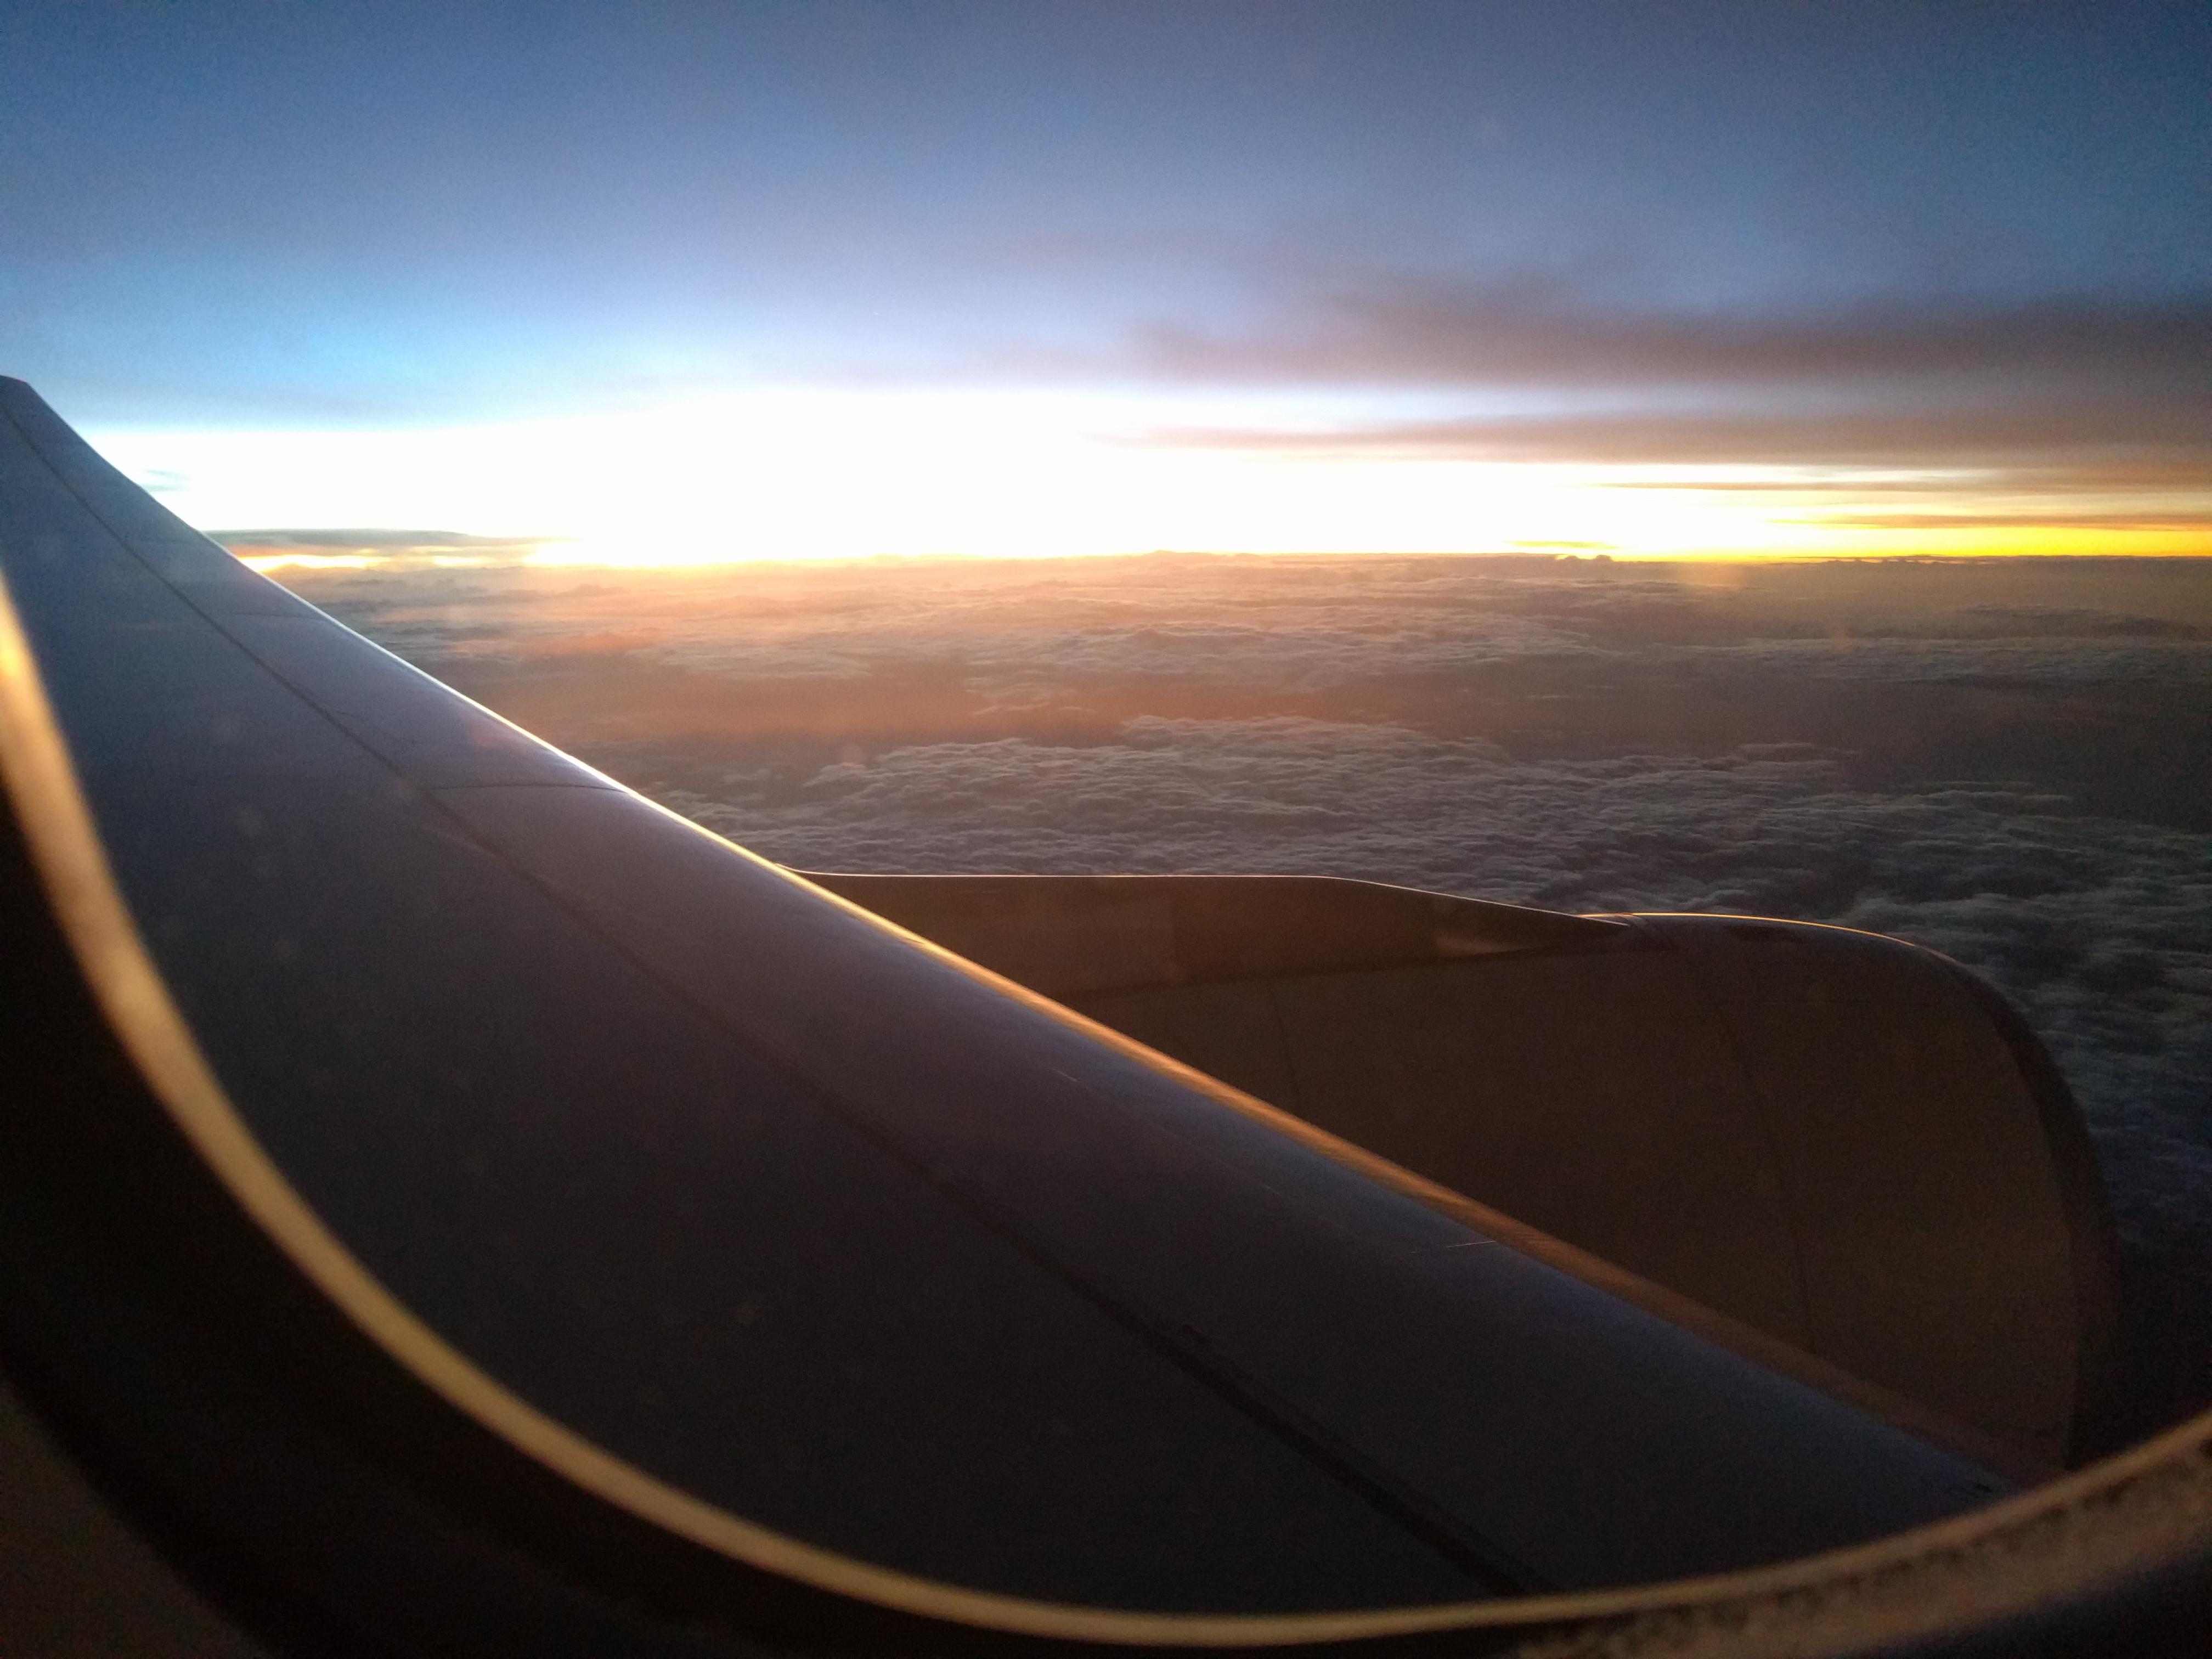 Sunrise over Africa from our plane